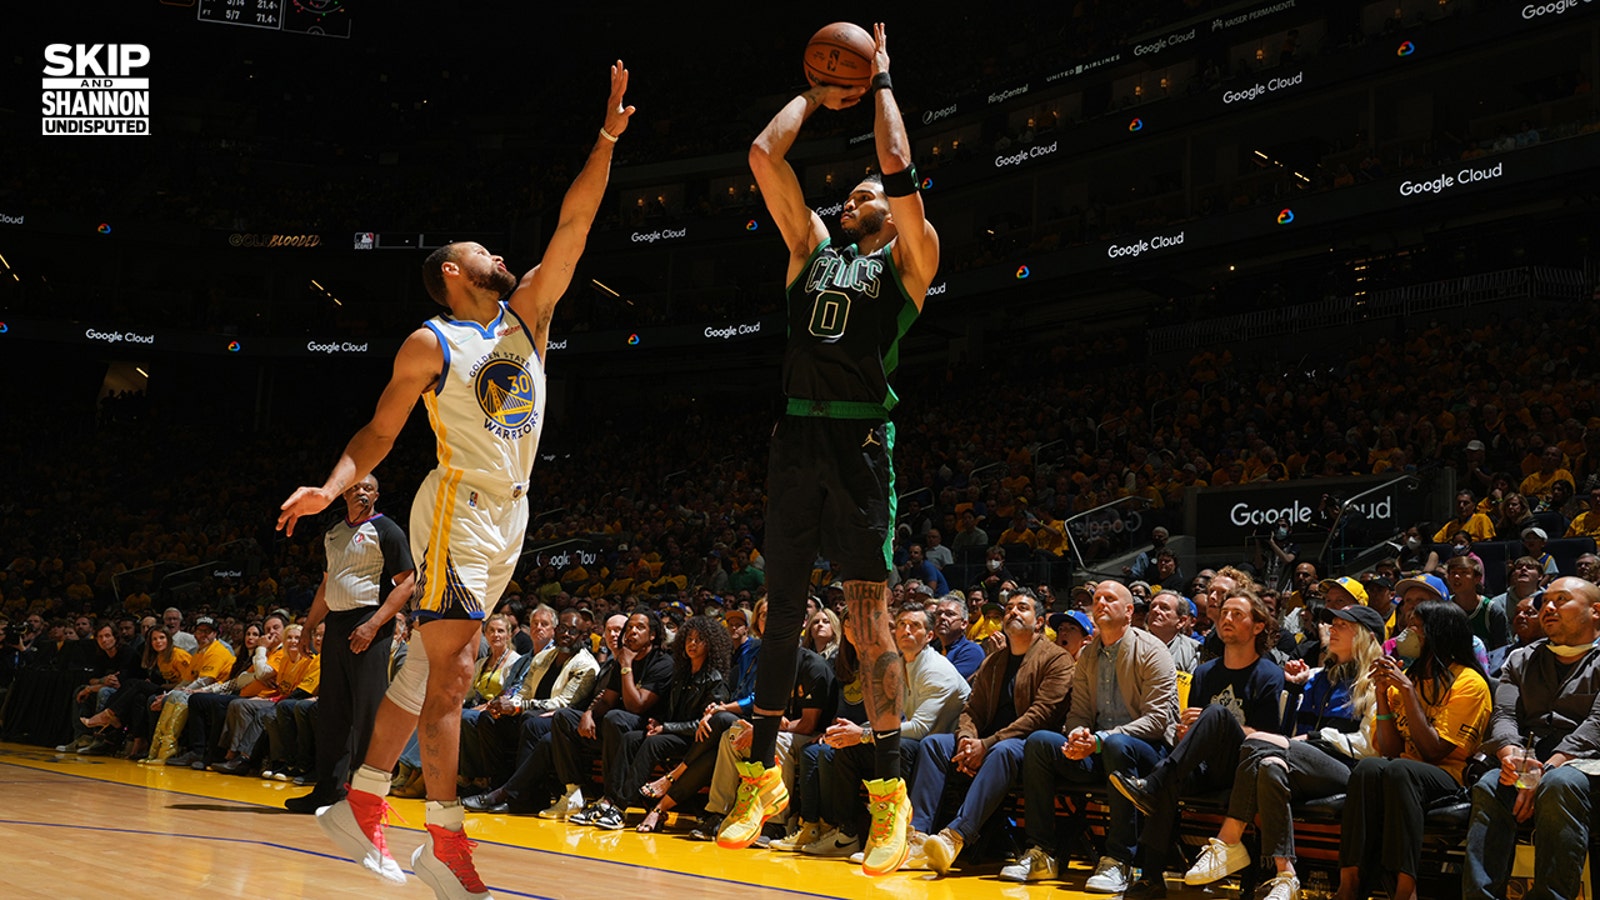 Celtics go cold in 4th quarter, Warriors capitalize to take 3-2 series lead I UNDISPUTED